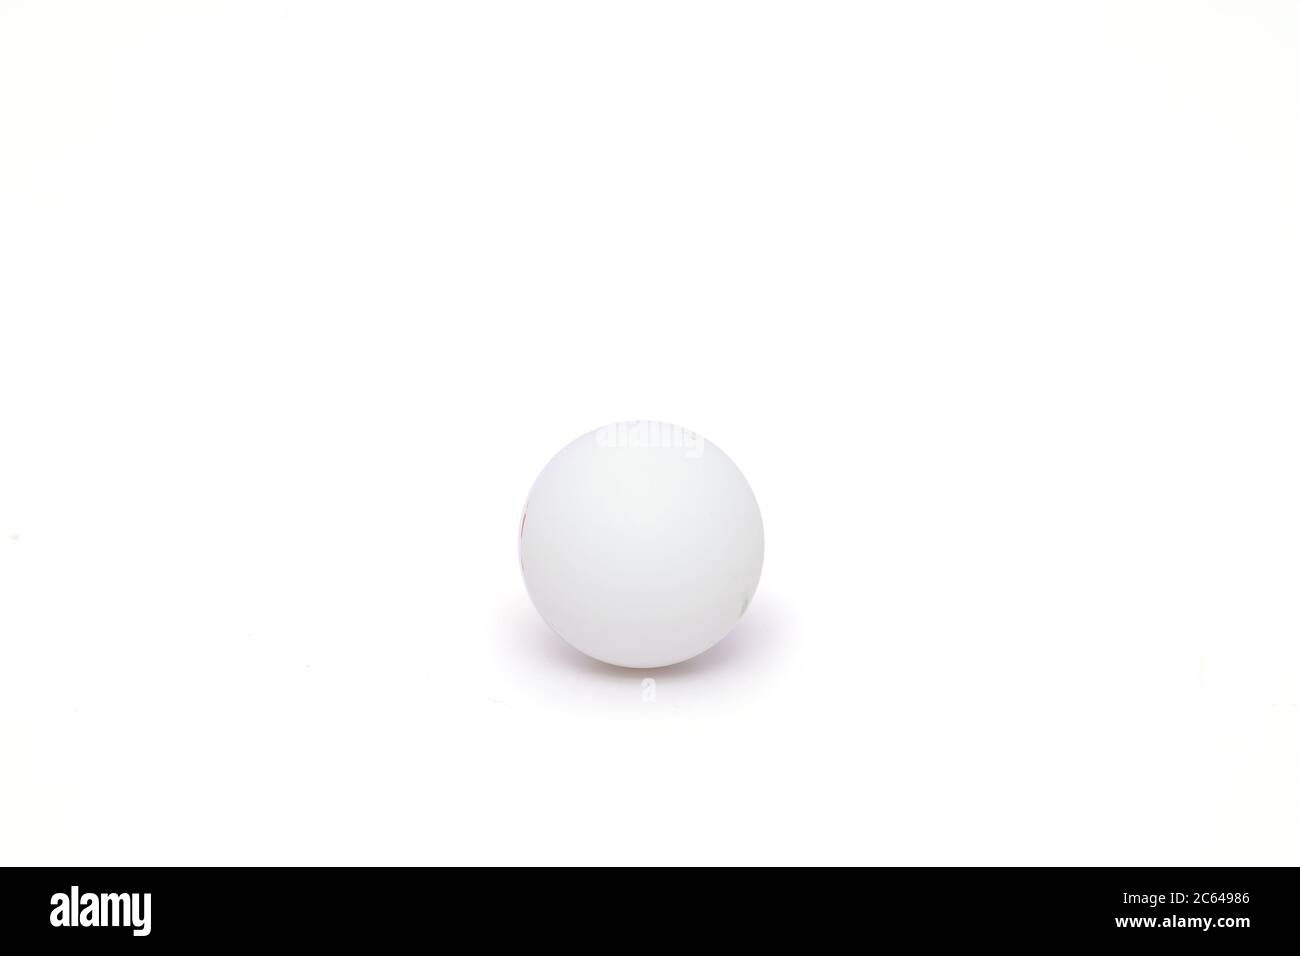 Portrait of White and Yellow Balls. Isolated on white background. Stock Photo